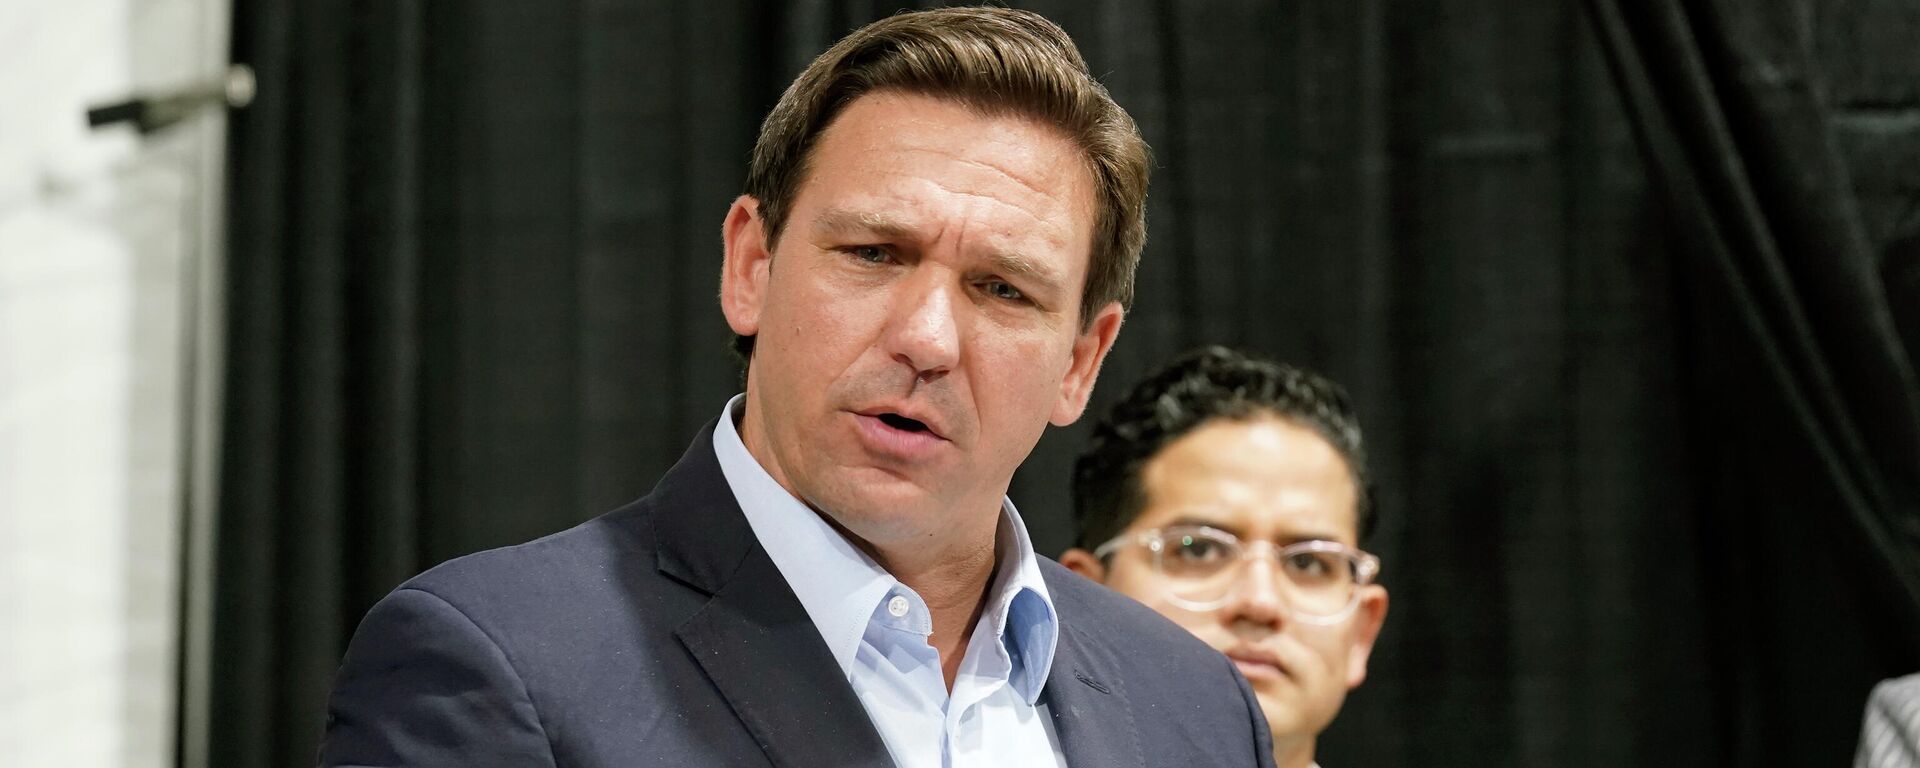  In this Wednesday, Aug. 18, 2021 file photo, Florida Governor Ron DeSantis speaks at the opening of a monoclonal antibody site in Pembroke Pines, Fla.  - Sputnik International, 1920, 14.04.2022